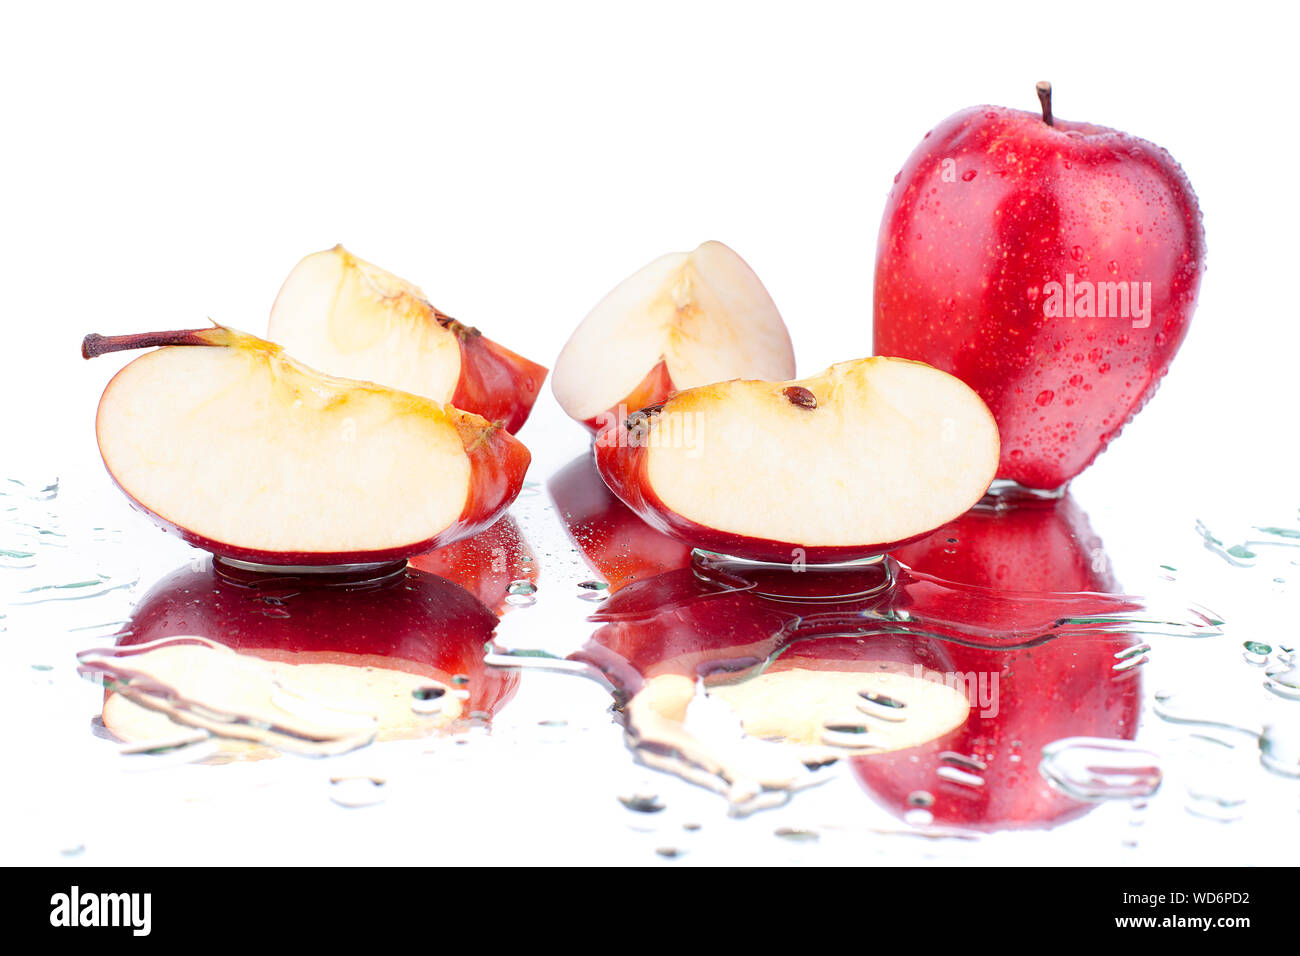 Whole red apple and apple sliced on quarters on white mirror background with water drops and reflection isolated close up Stock Photo